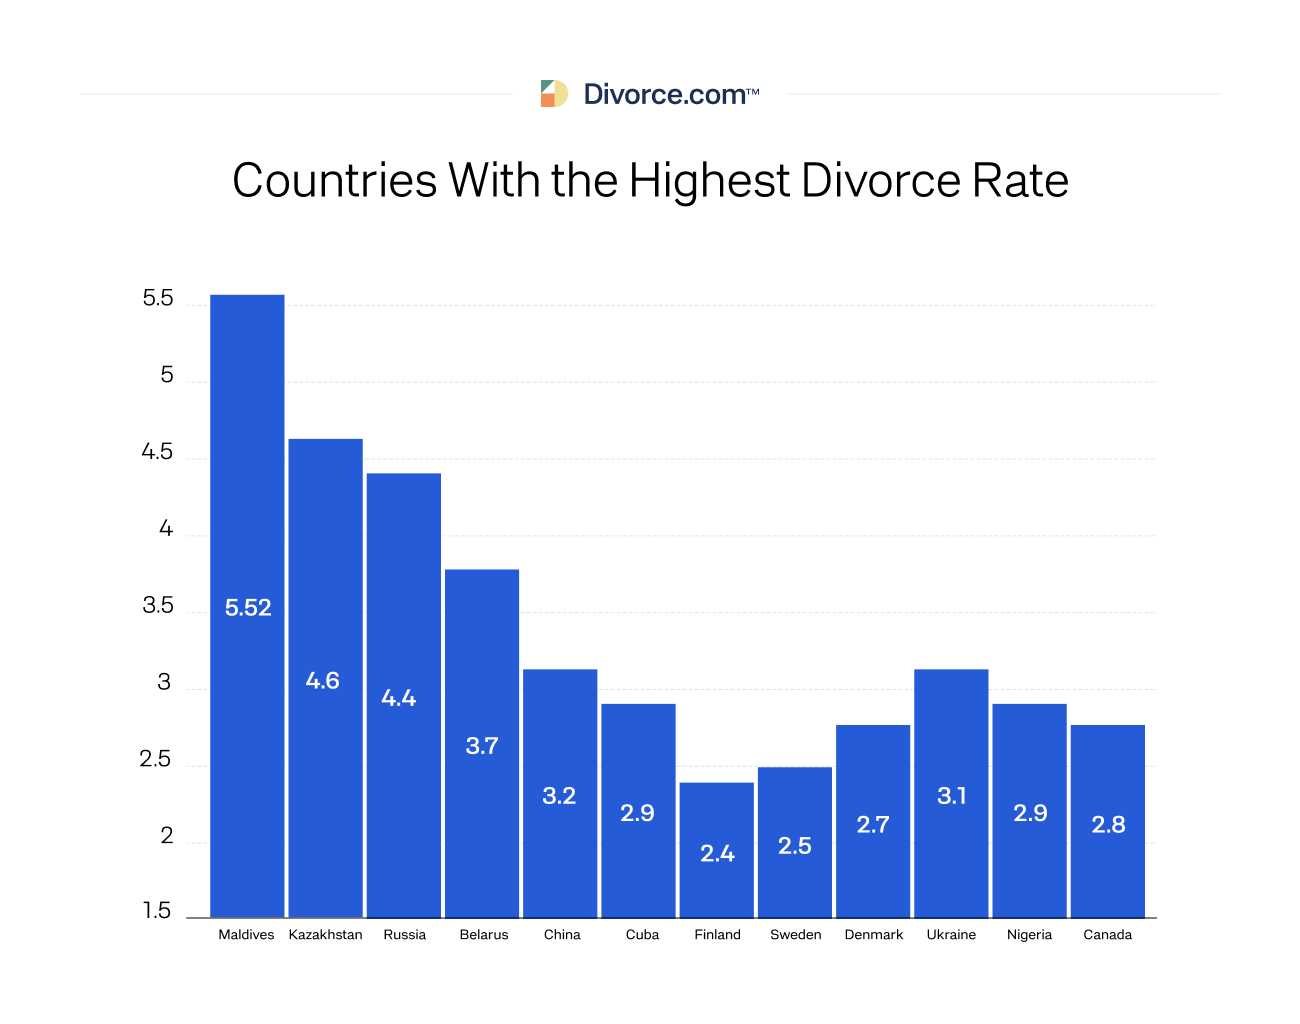 There are factors that influence a high divorce rate, too